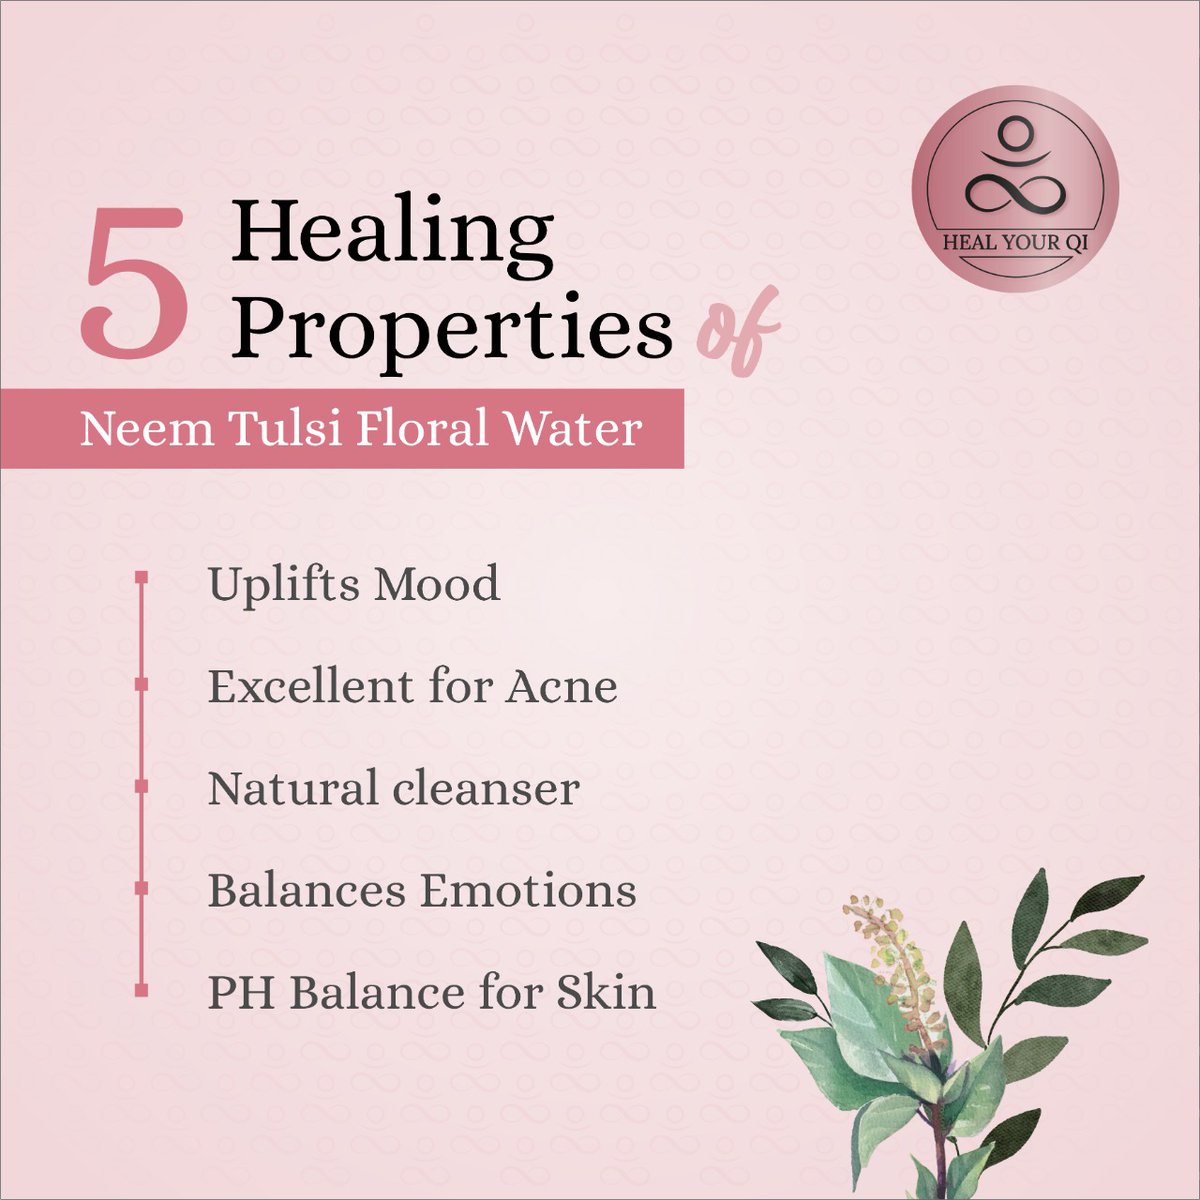 Not only these 5, but there are alot more ✨ Stay tuned to know more about healing 😇 . . . . . . . . . . . #feeltheheal #vocalforlocal #organicproducts #neemhydrosol #tulsihydrosol #hydrosol #hydrosols #hydrosoldistillation #hydrosolwater #hydrosolsprays